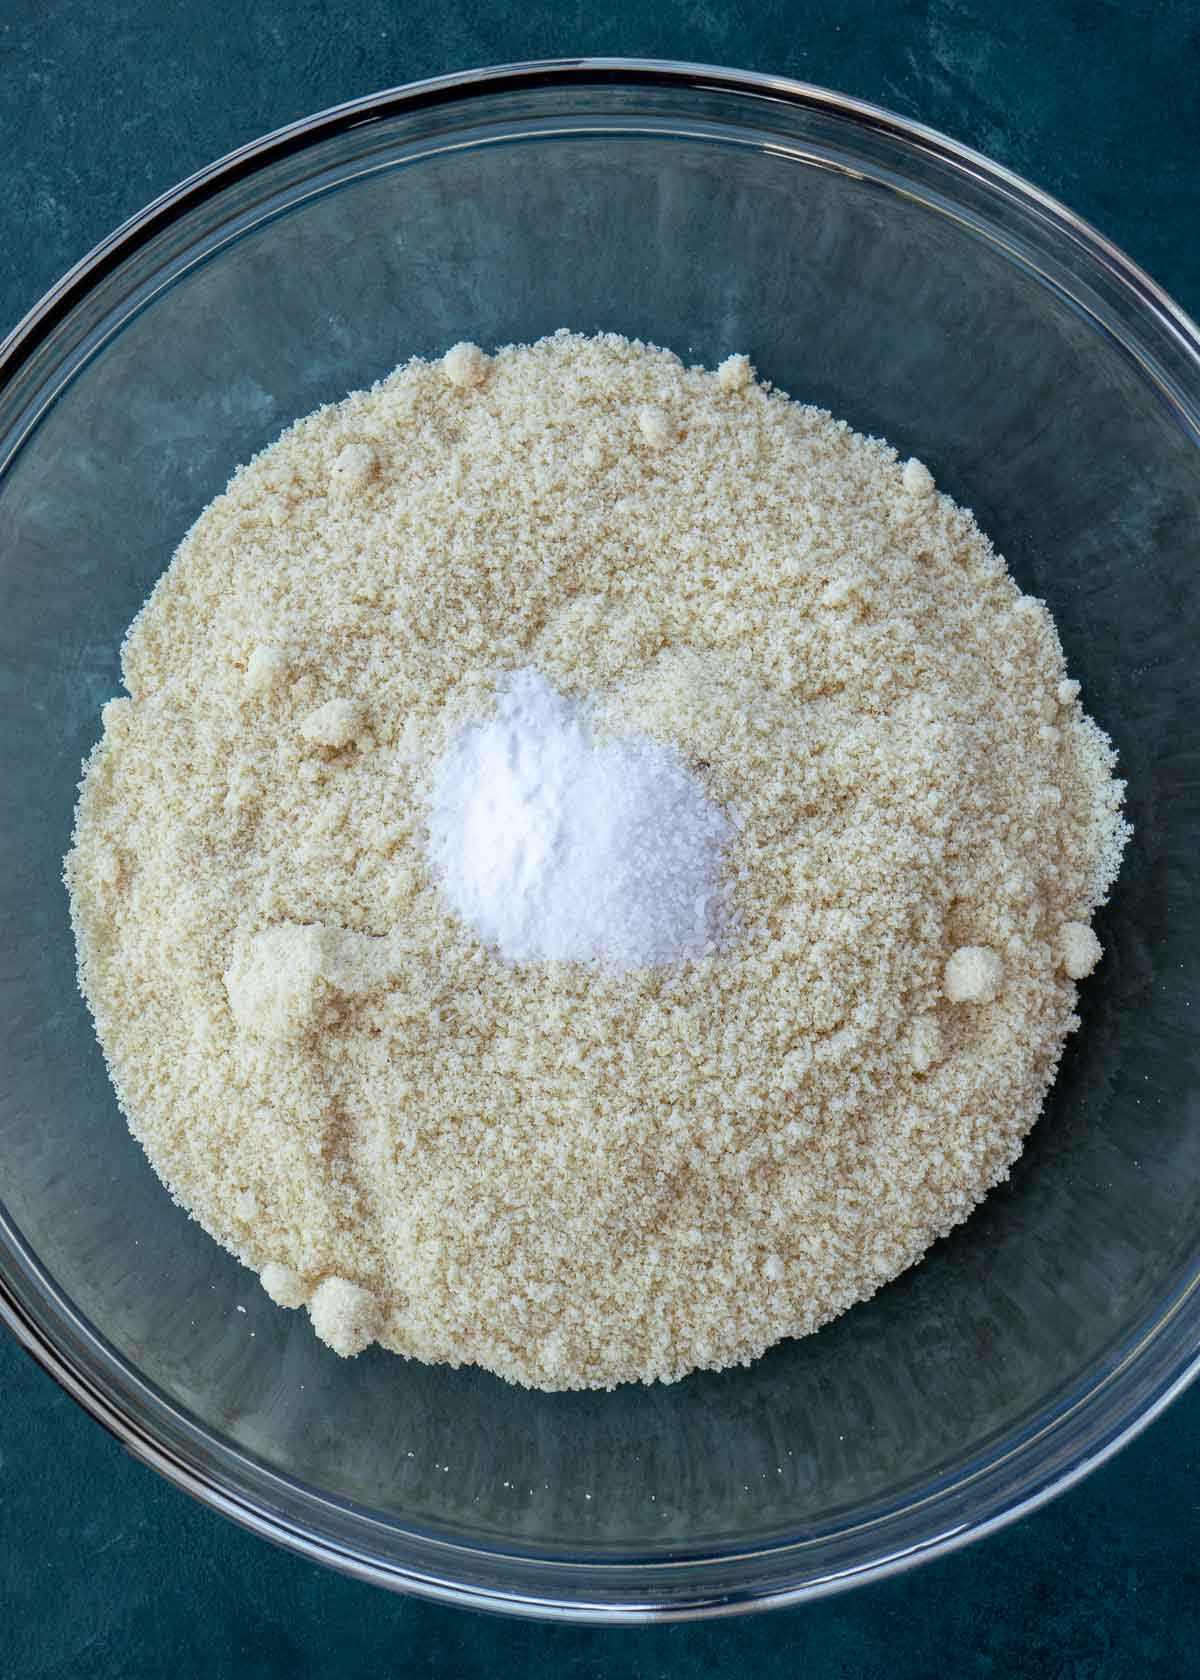 Salt, baking soda, and almond flour in a mixing bowl